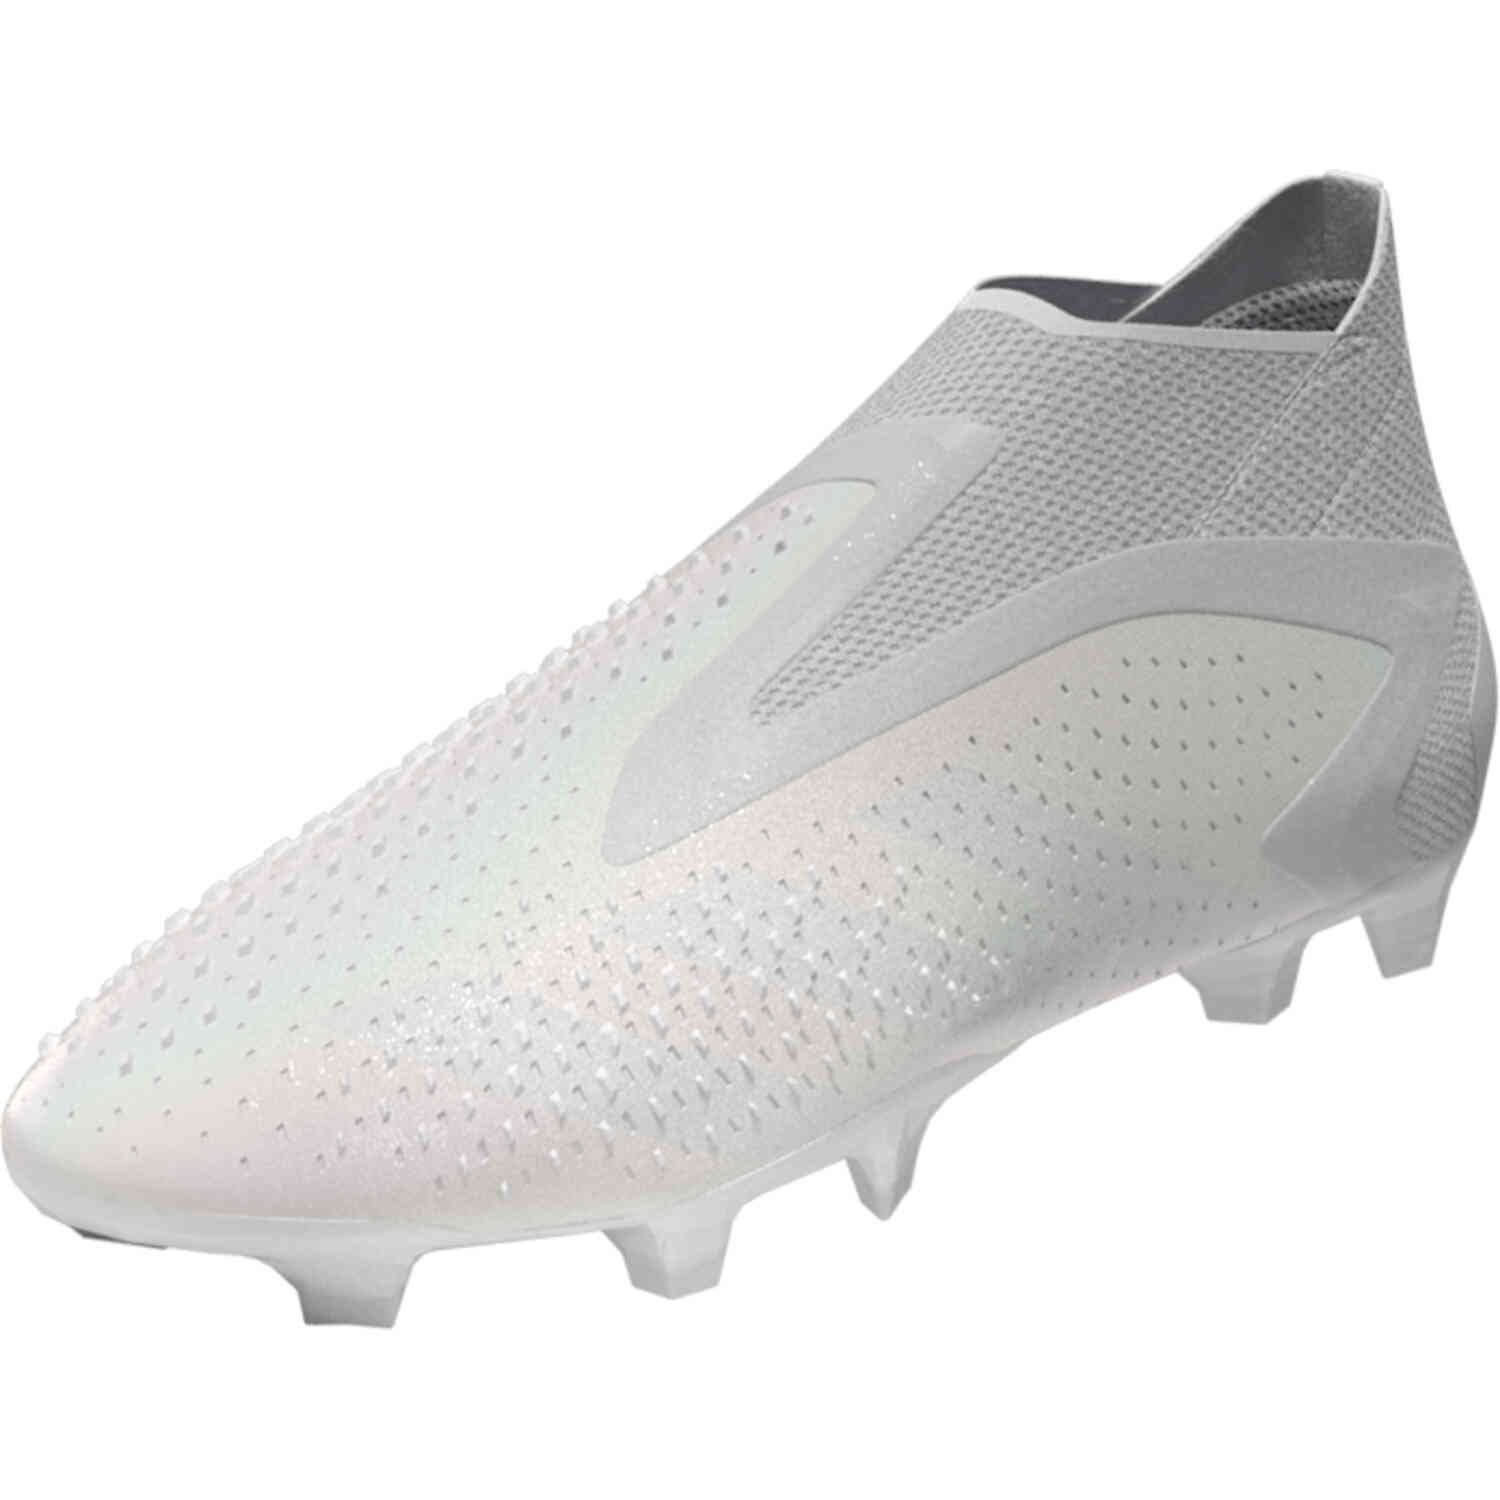 Best Soccer Cleats of 2023